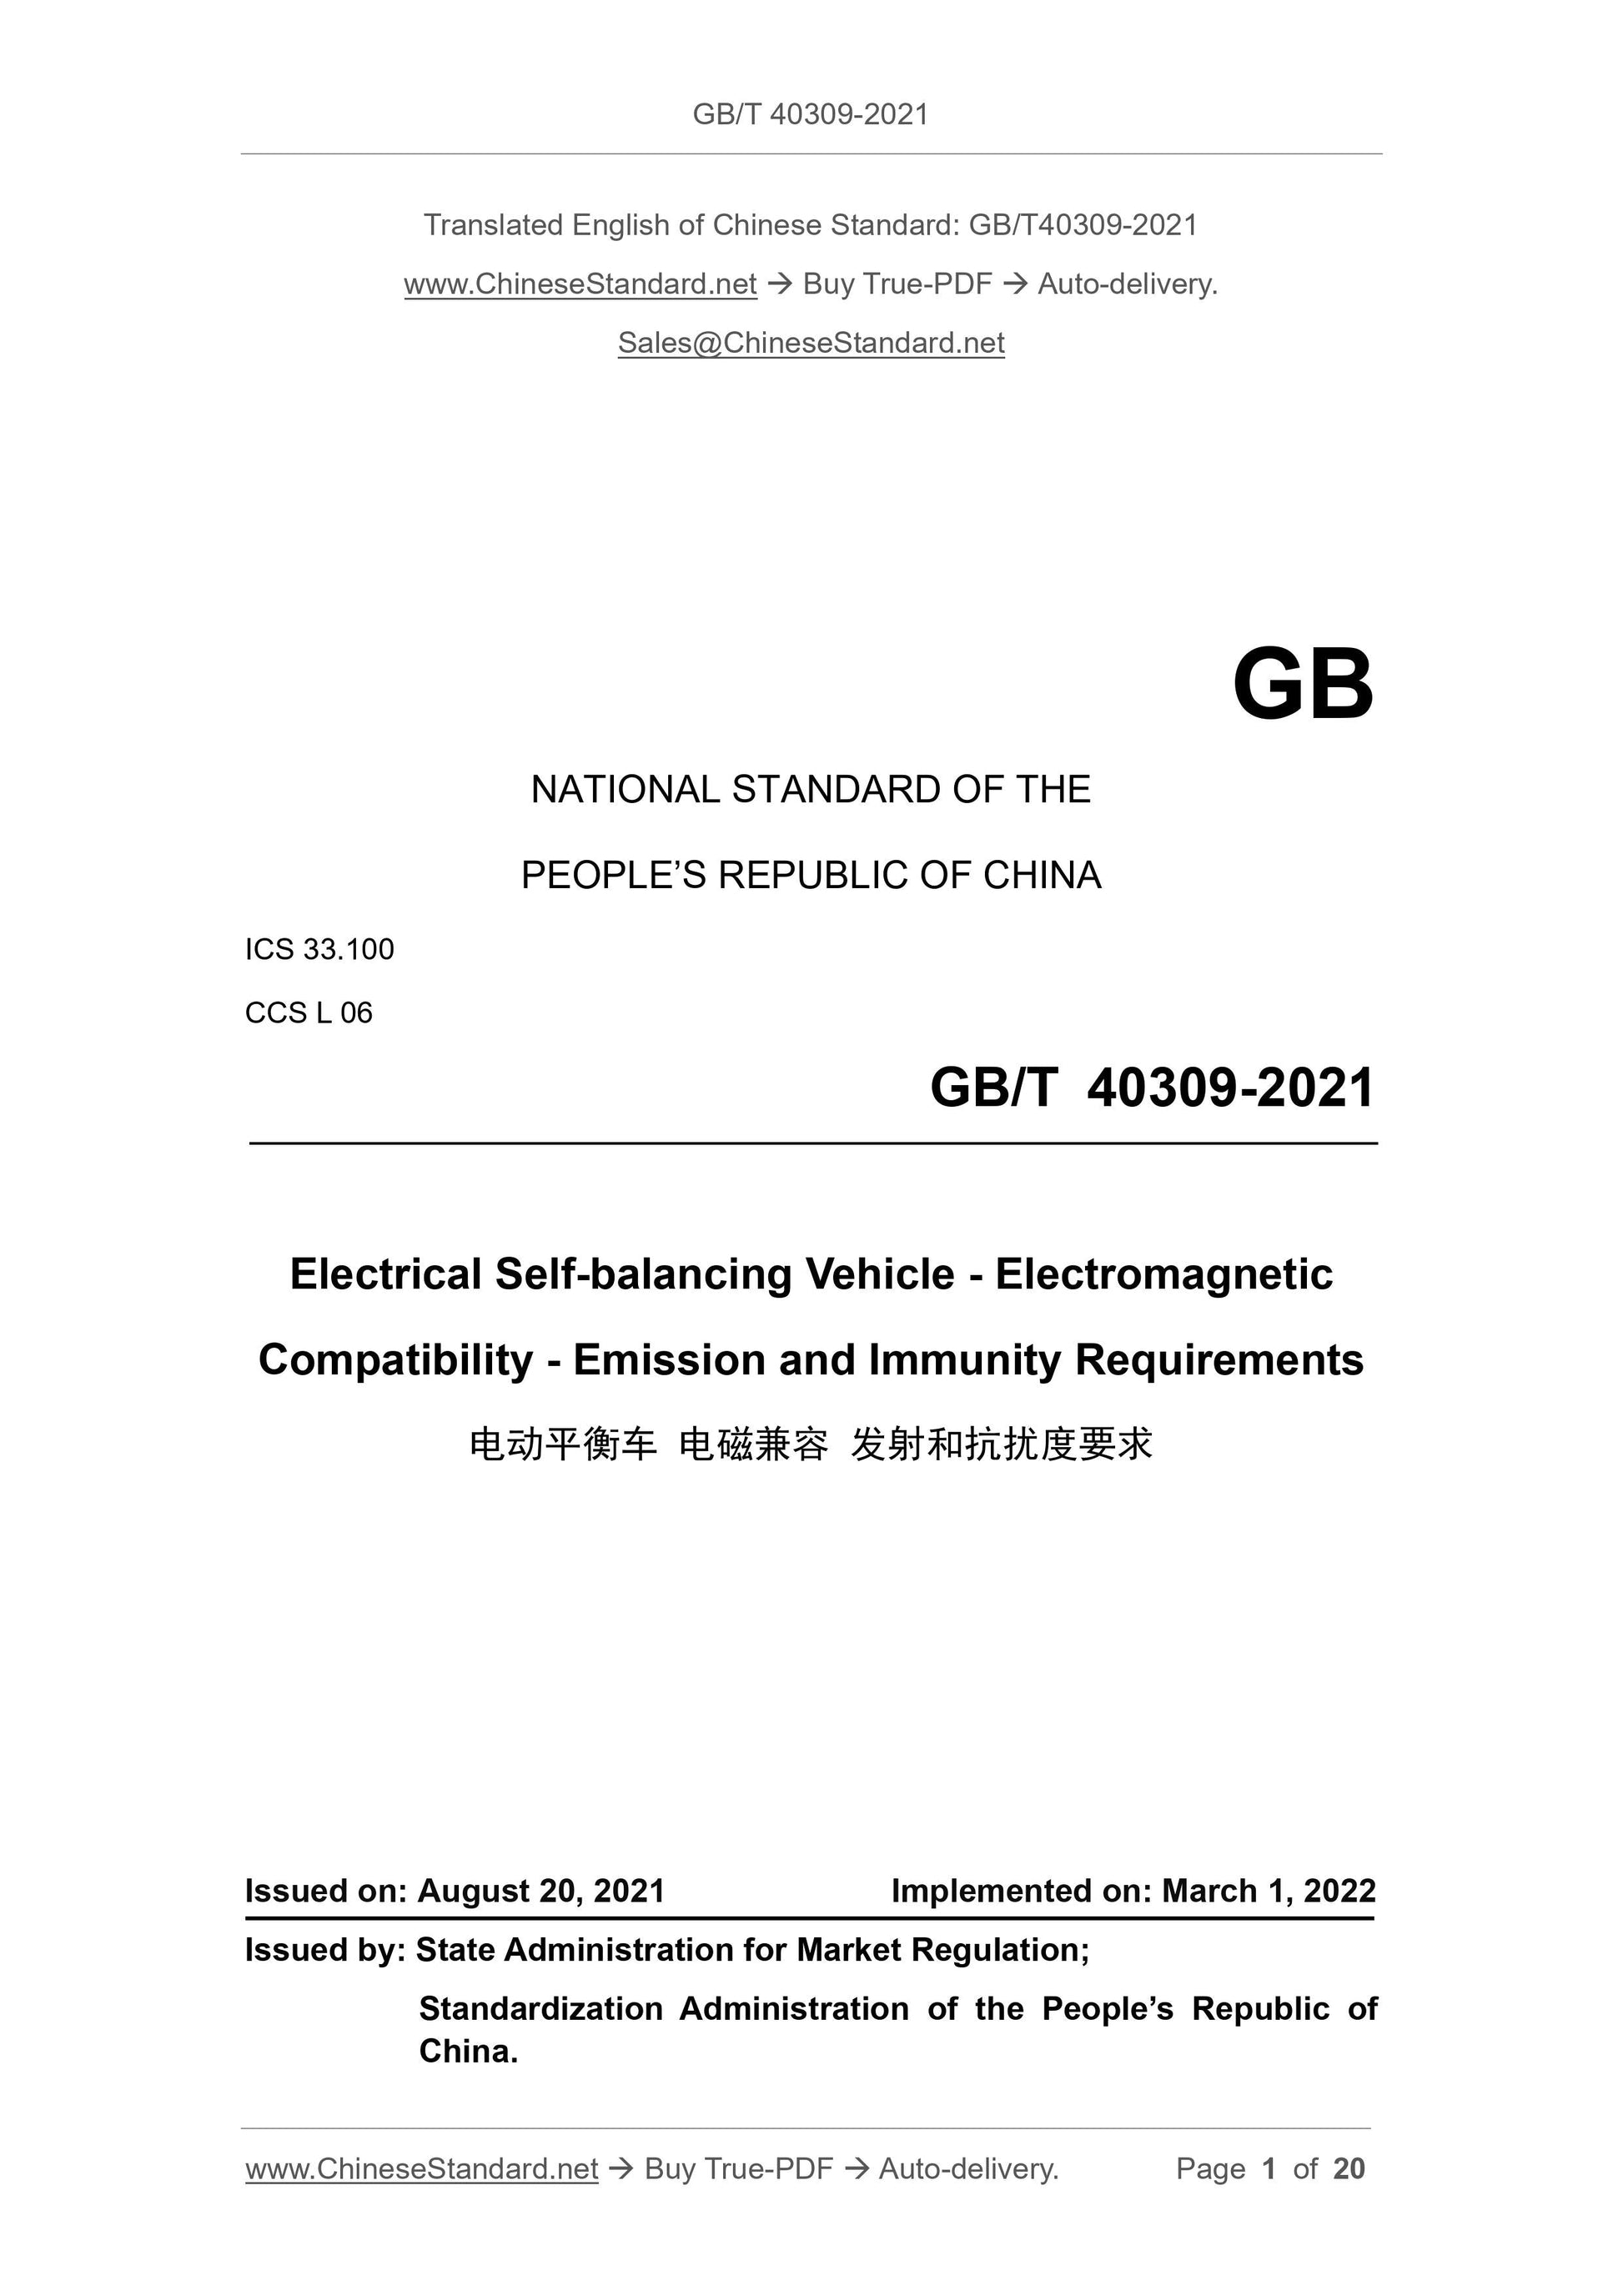 GB/T 40309-2021 Page 1